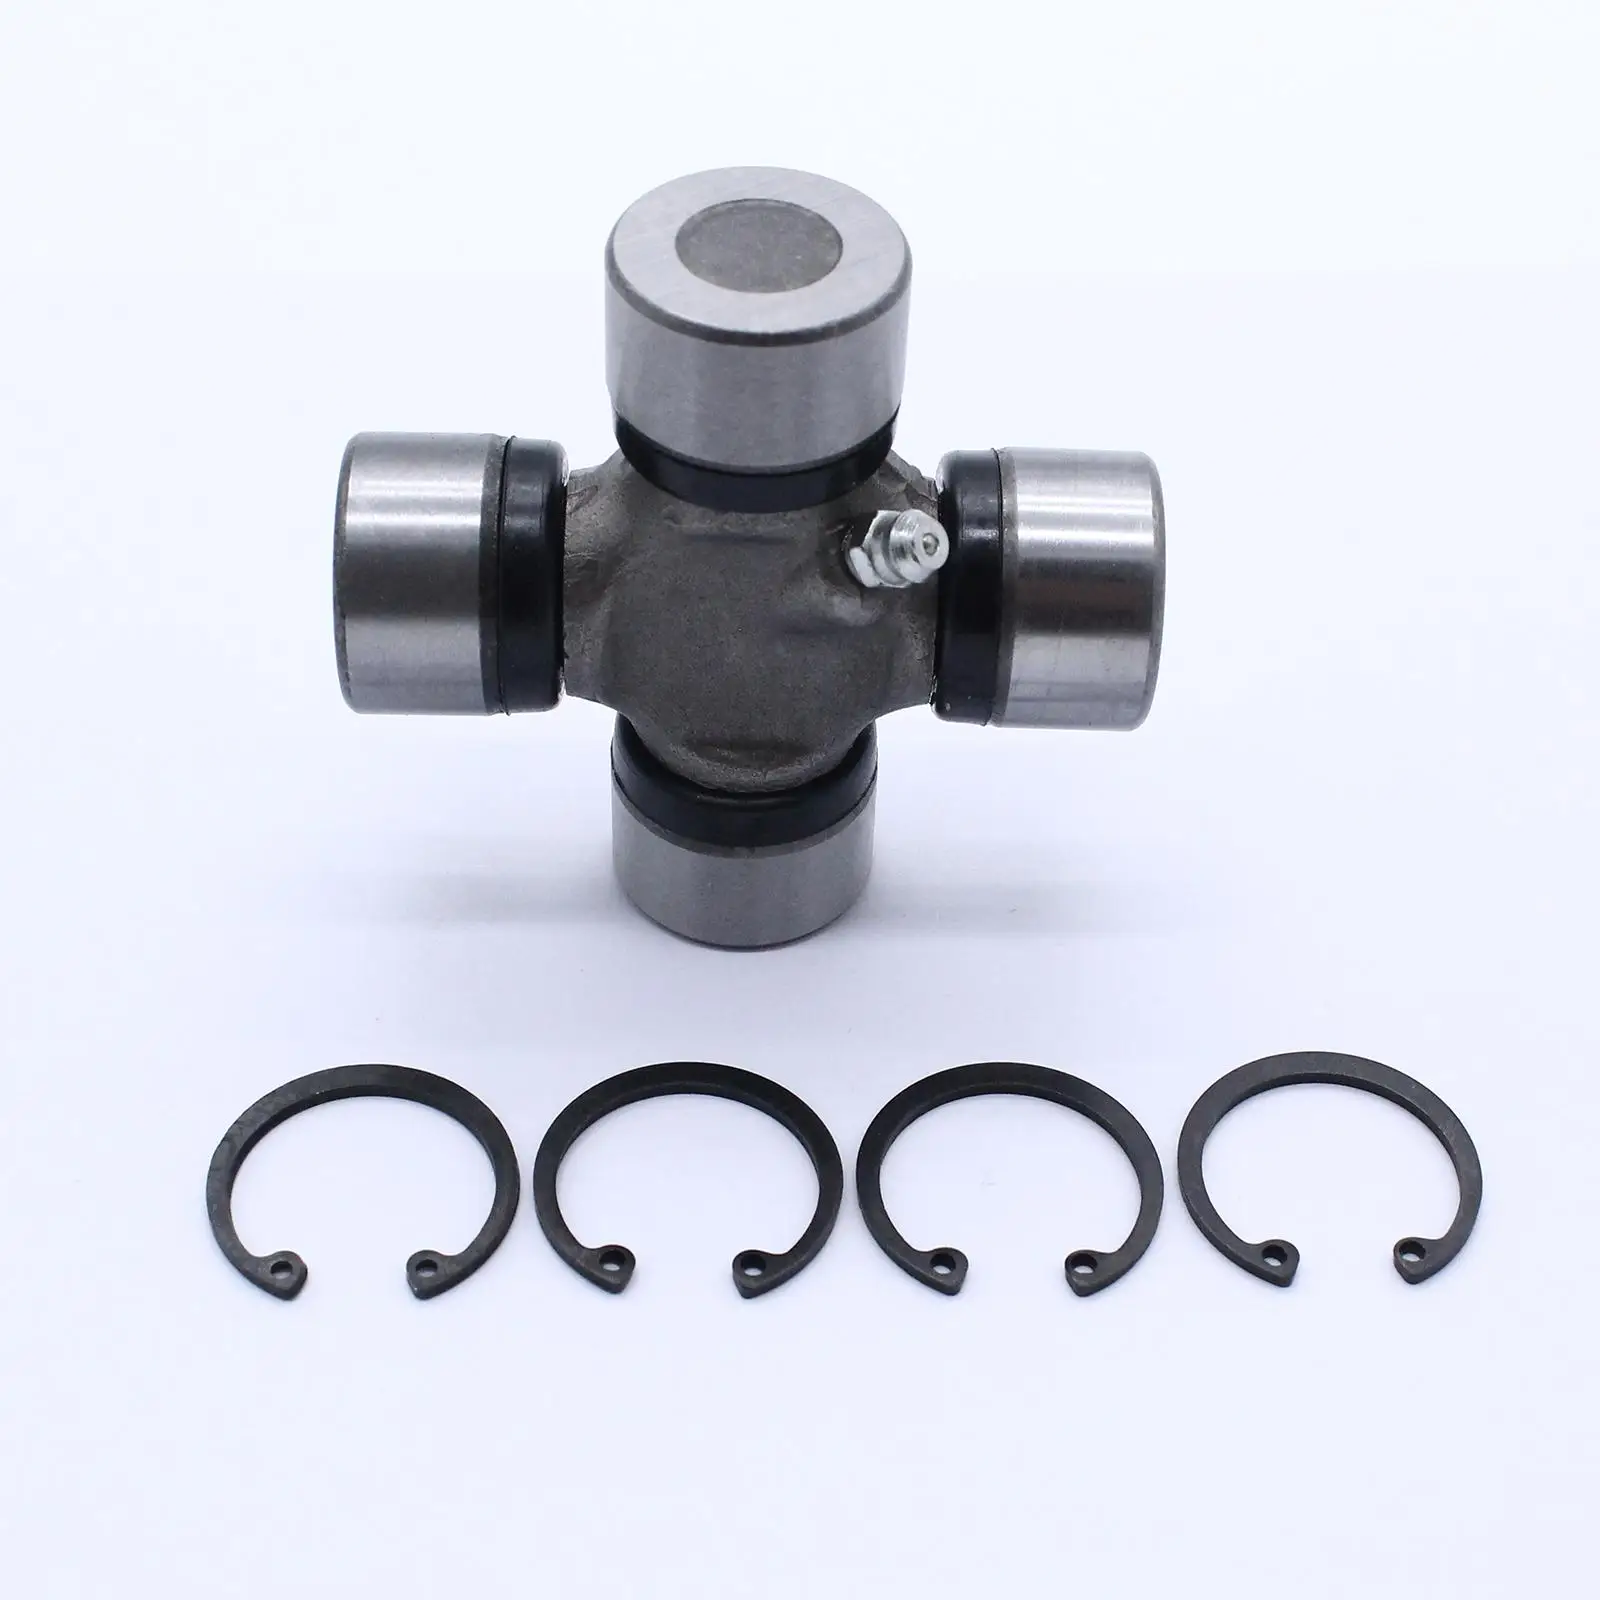 Automobile Front Joint Cross Bearing 37125-3x00A Metal U-Joints Accessories Replace Fit for D40 2.5Dci yd25Ddti